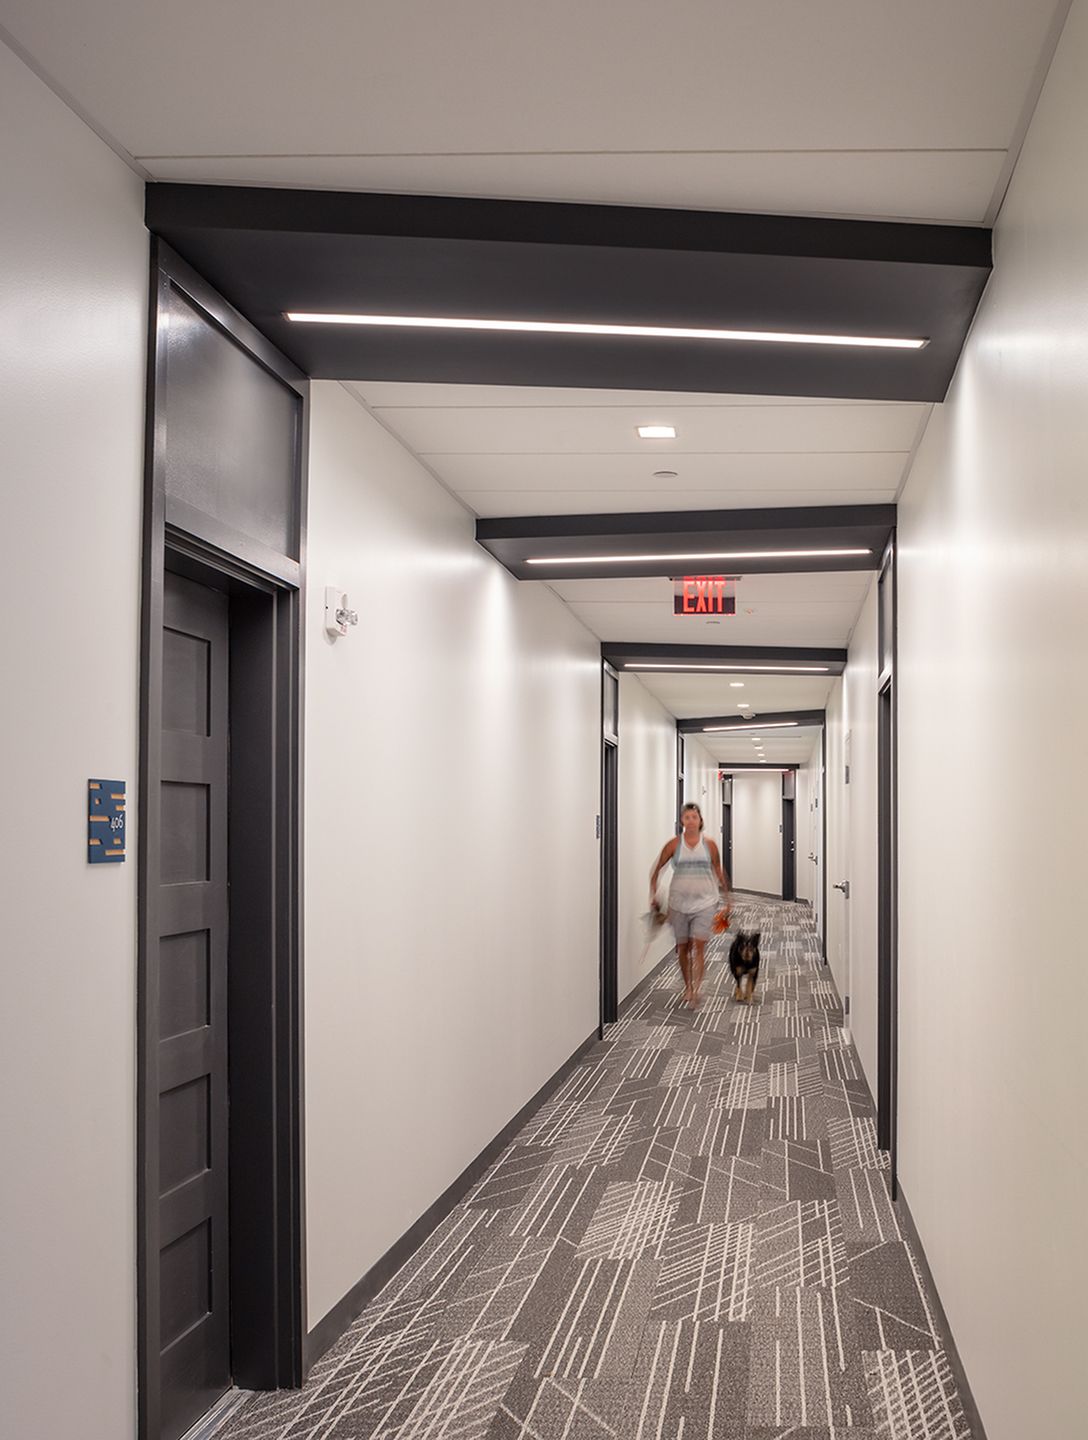 Hallway at The Veridian Residences.